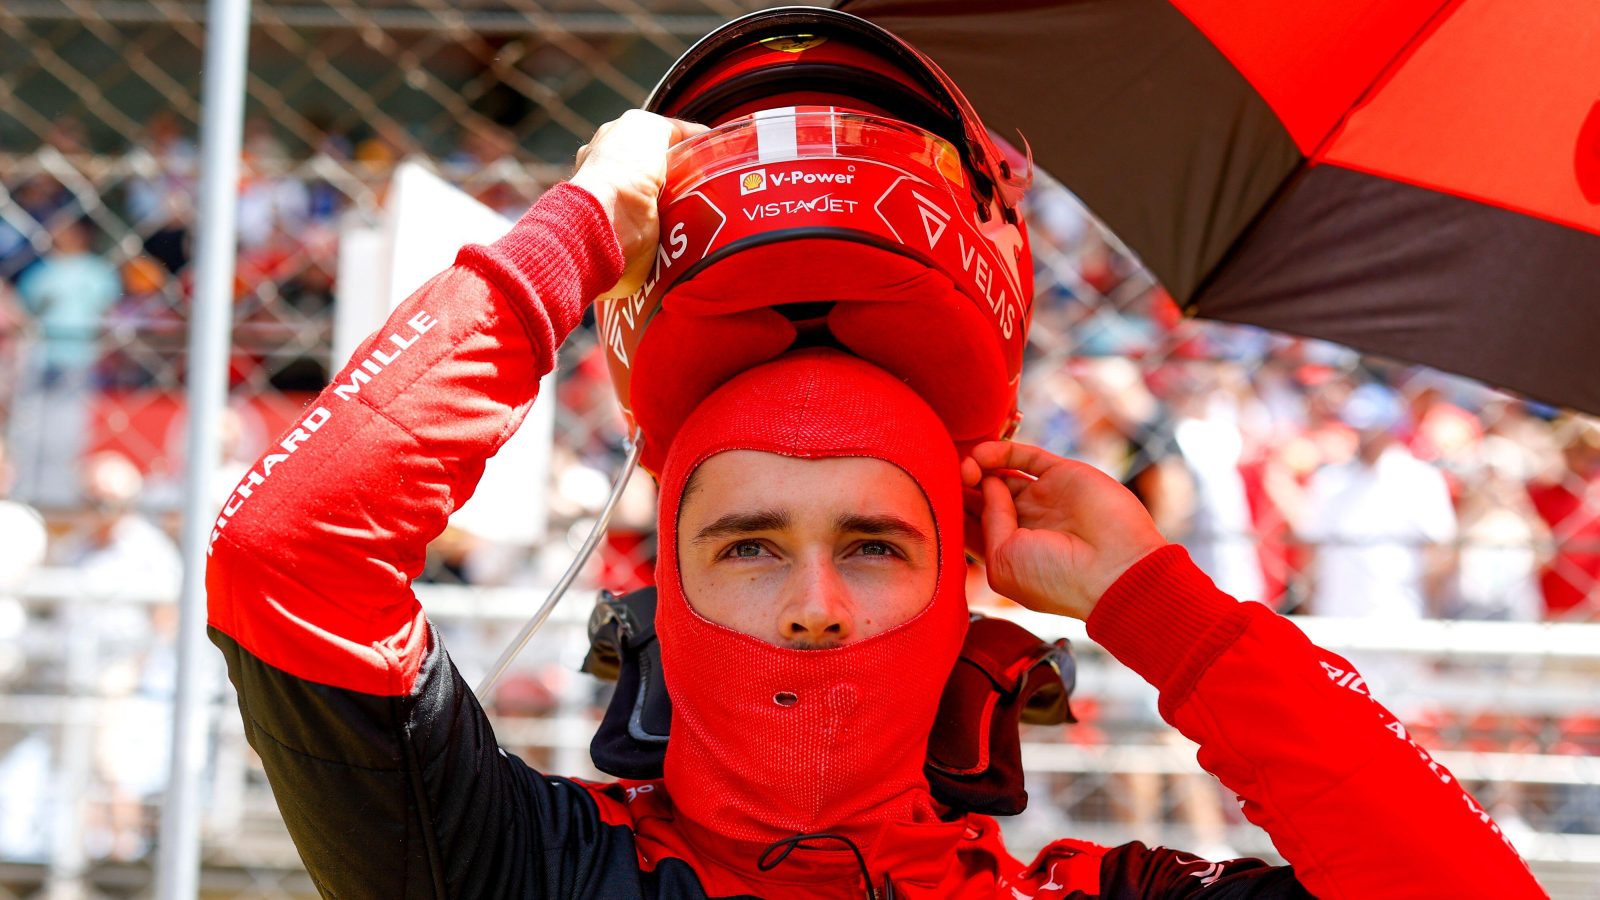 Charles Leclerc putting his helmet on. Barcelona, May 2022.